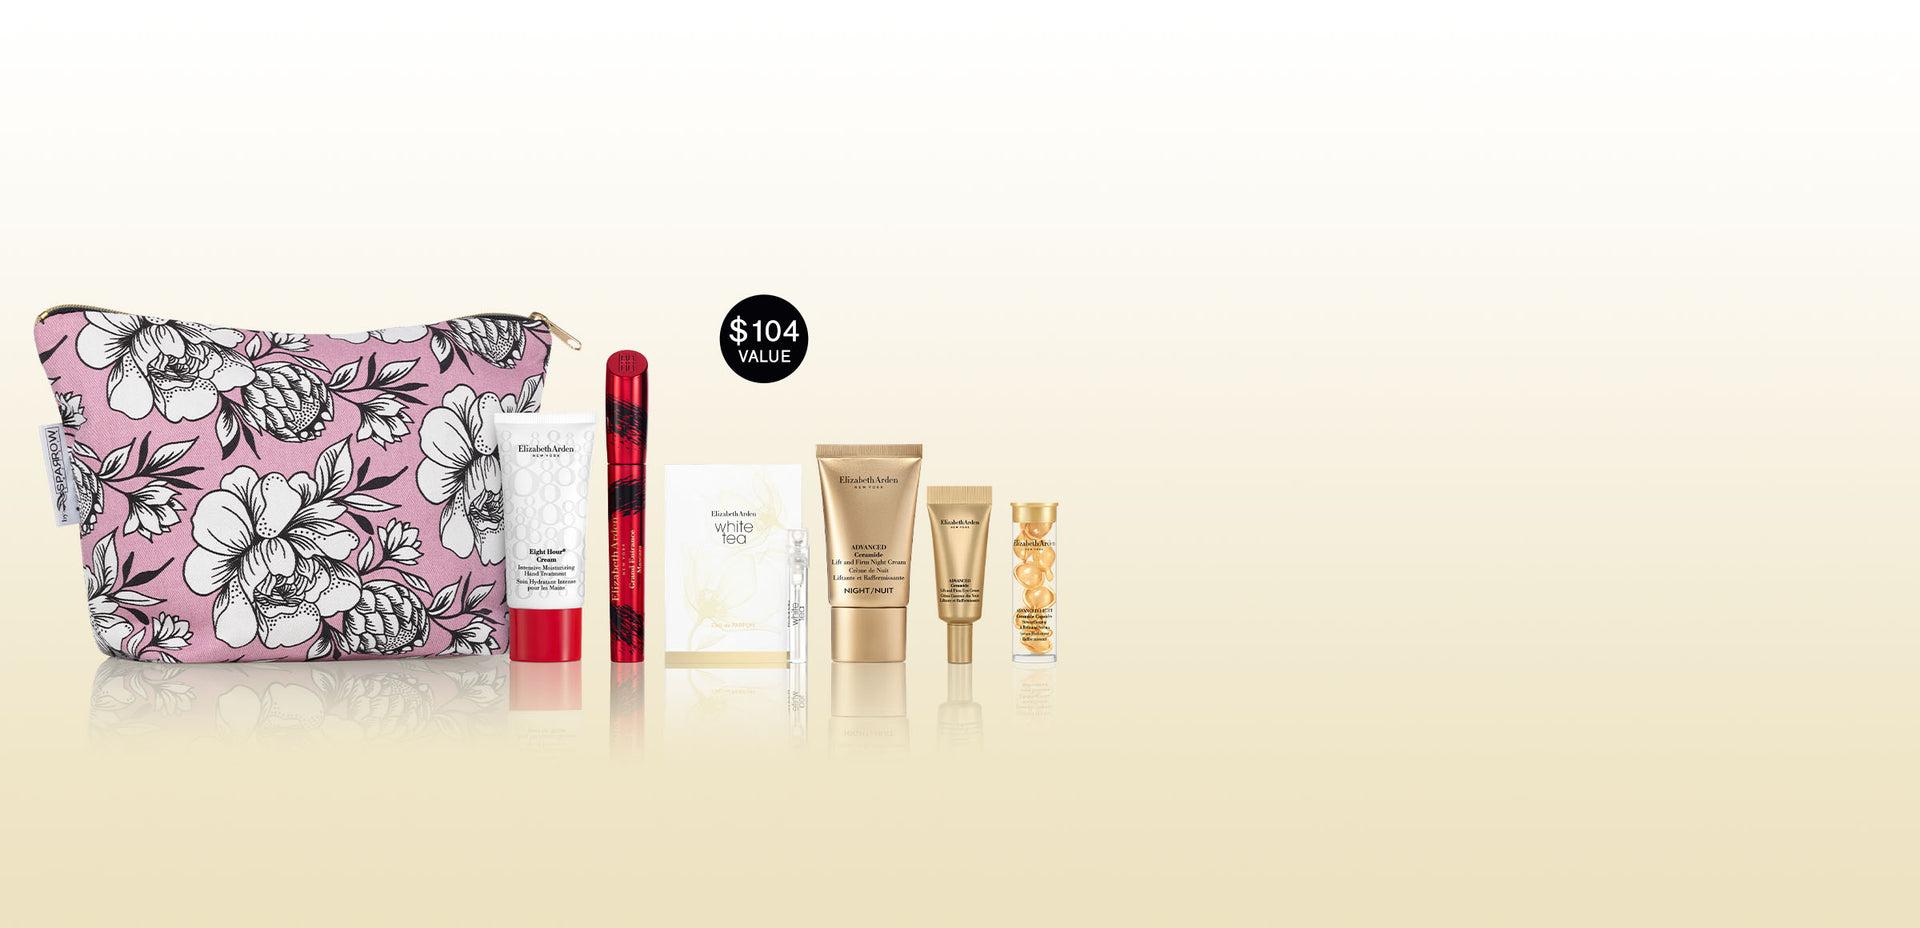 Elizabeth Arden - Get 20% off any $100 purchase!